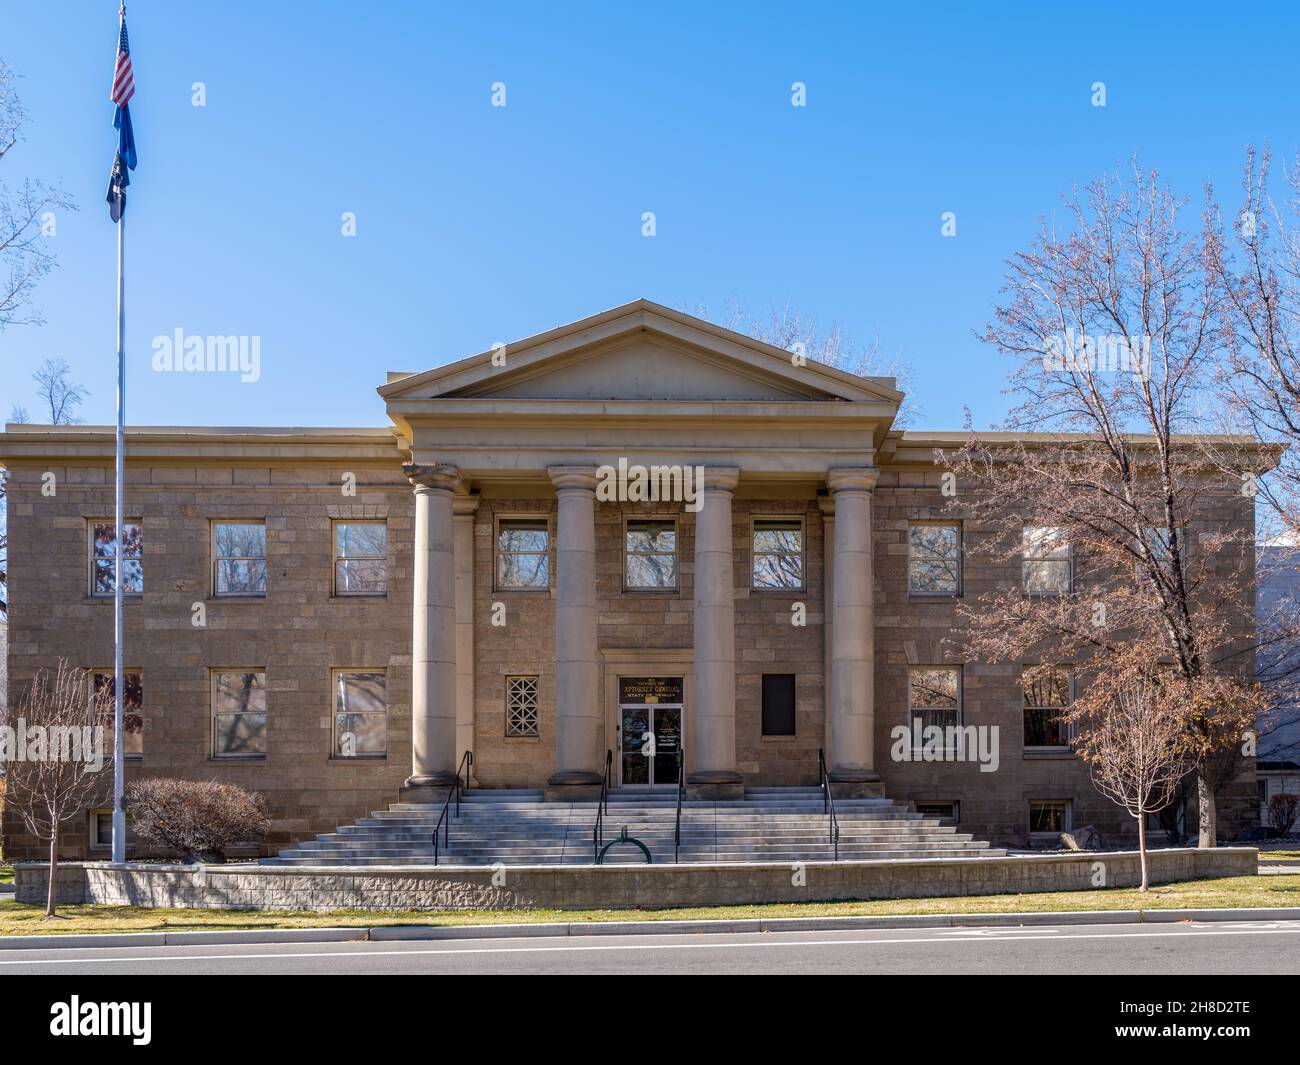 Carson City, Nevada - USA - November 28, 2021: Nevada Attorney General’s Office across from the state capitol on N Carson St. Stock Photo